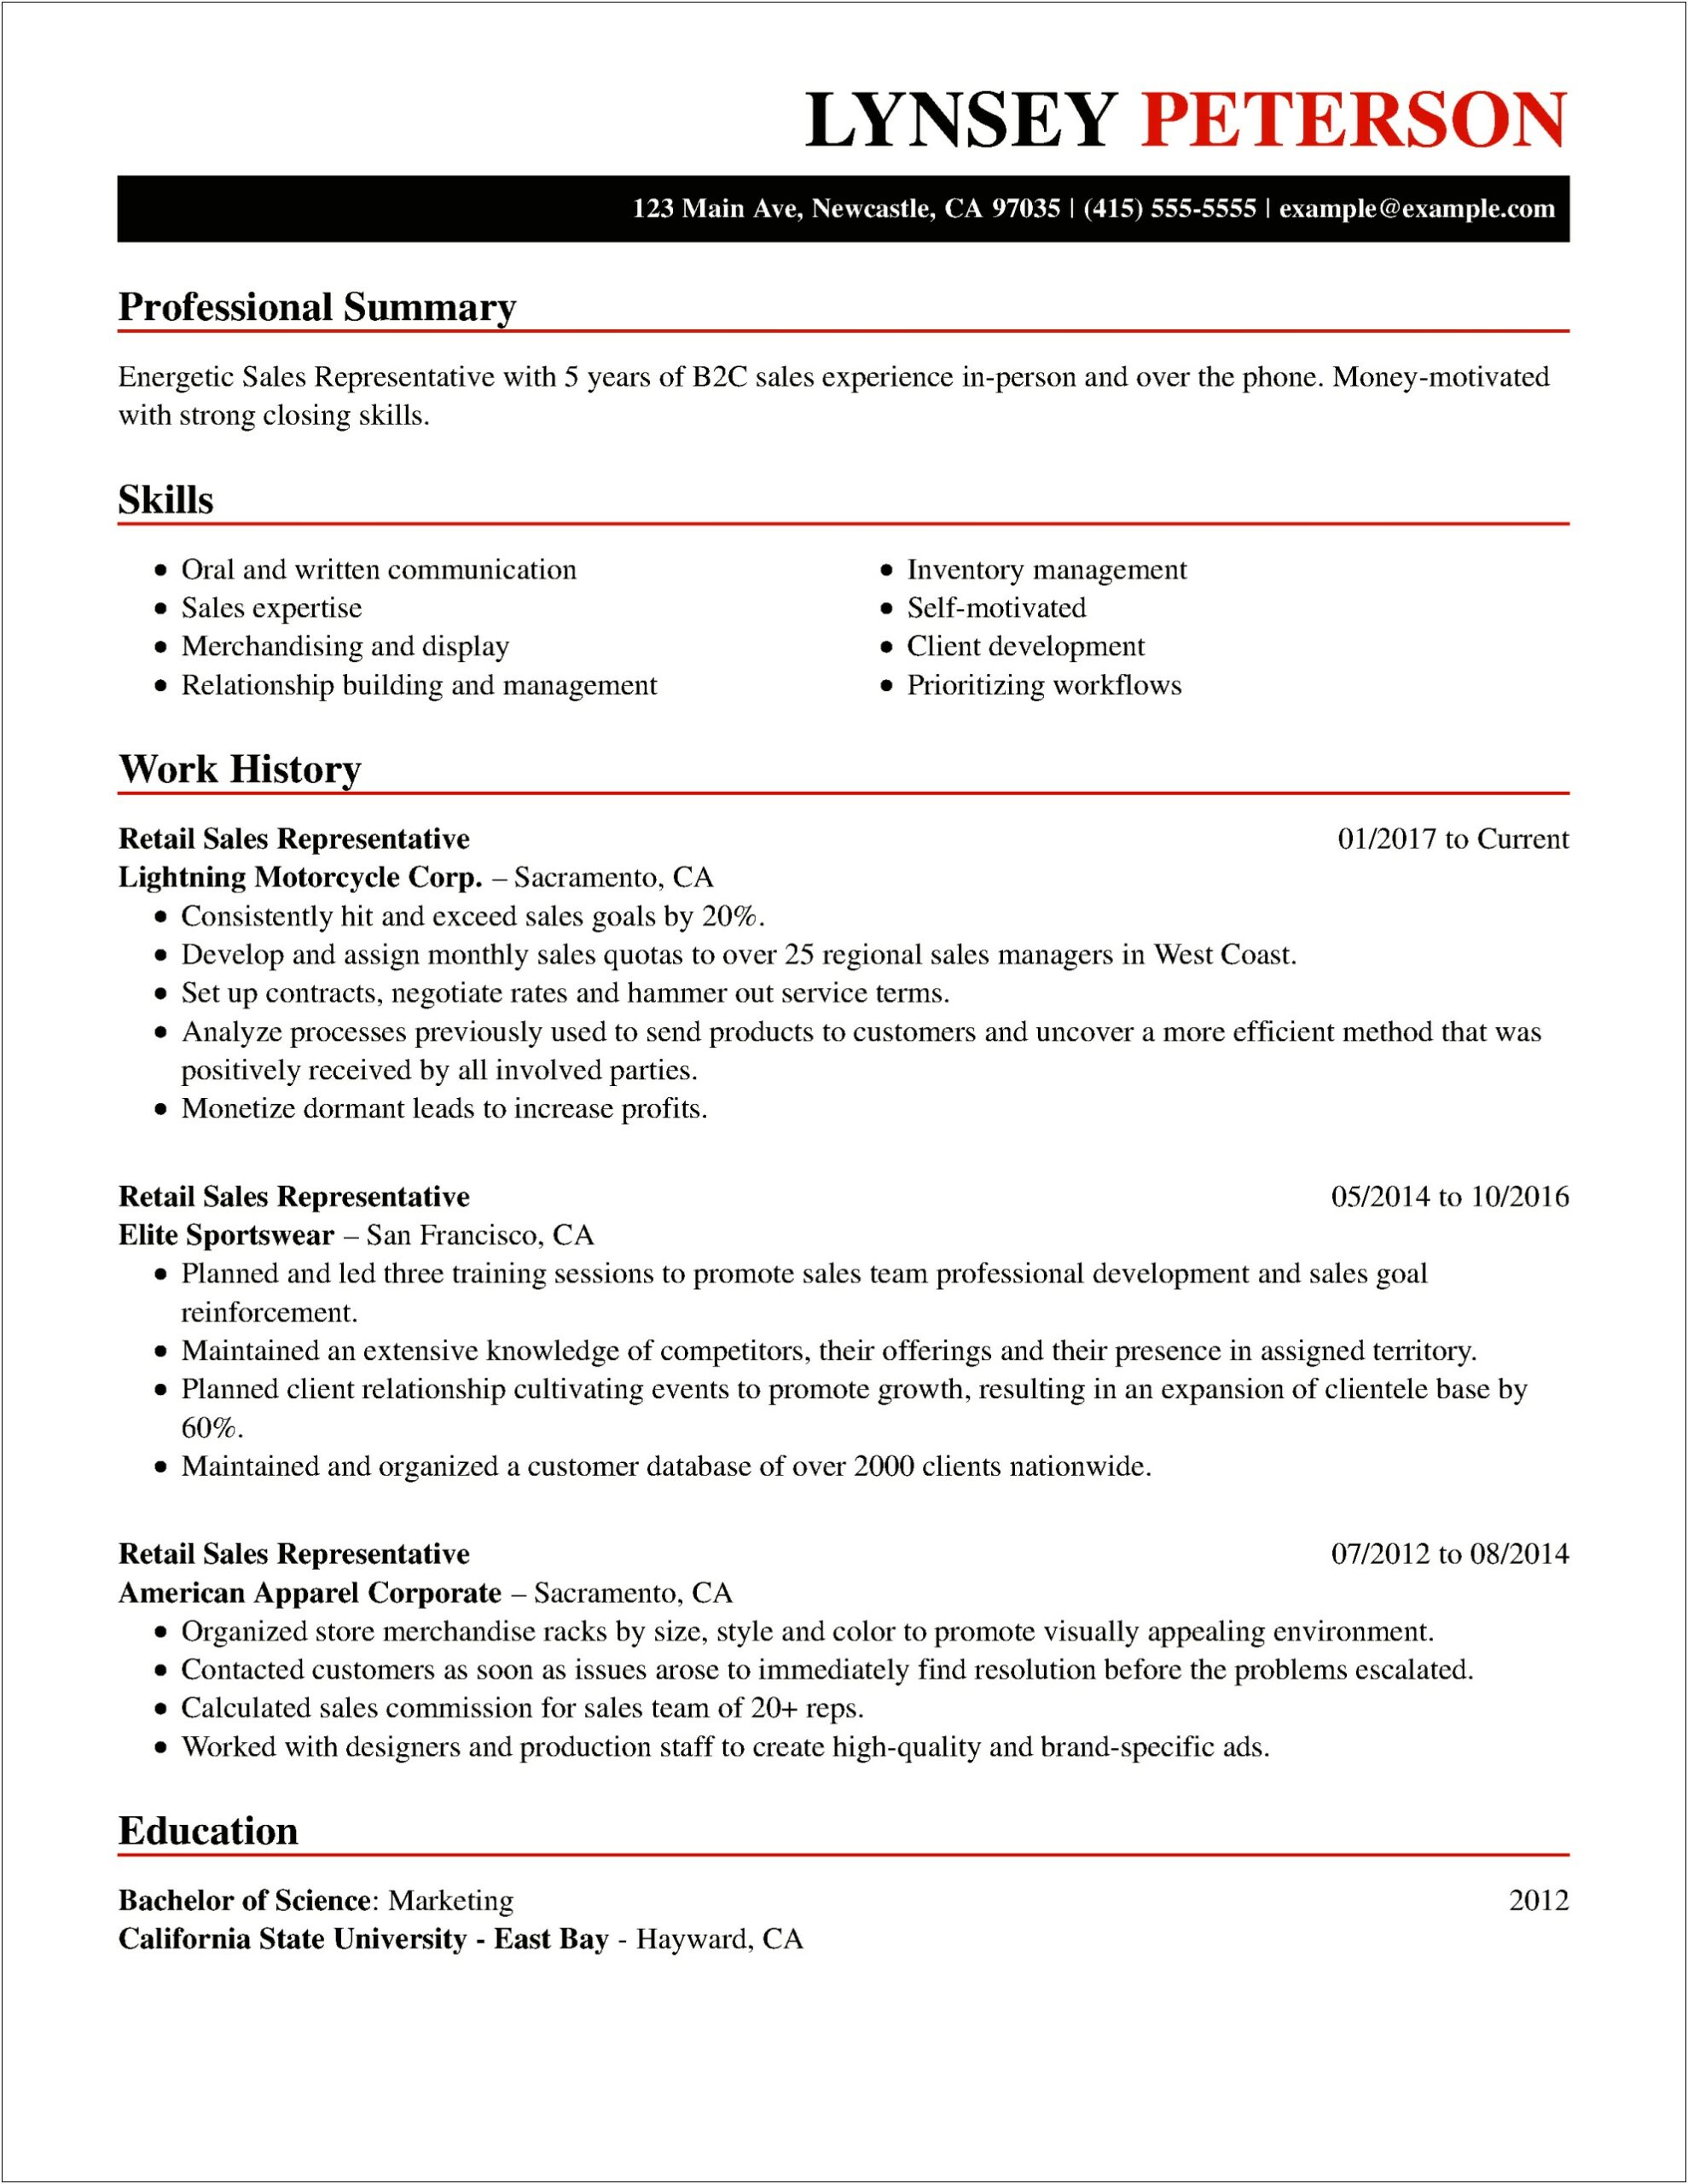 Creative Way To Name Your Summary In Resume